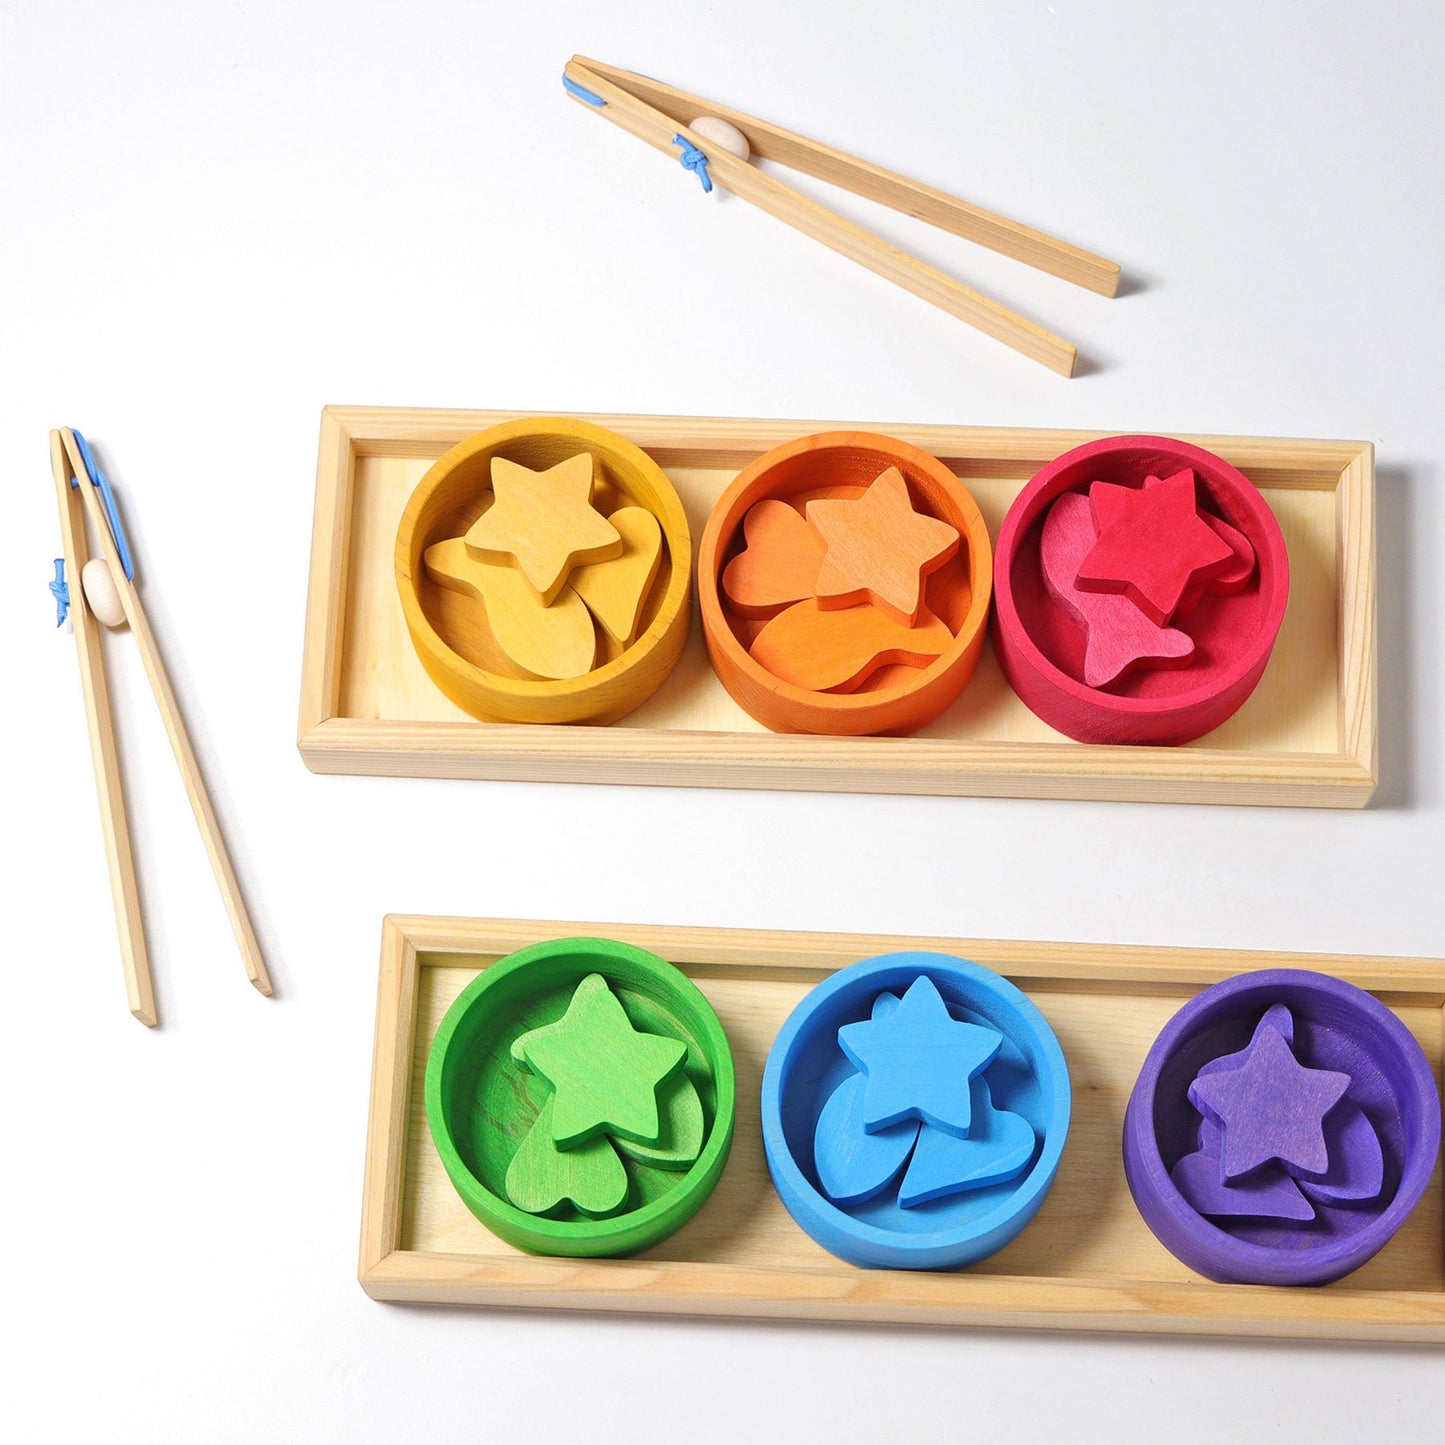 Grimm's Wooden Rainbow Bowls Sorting Game